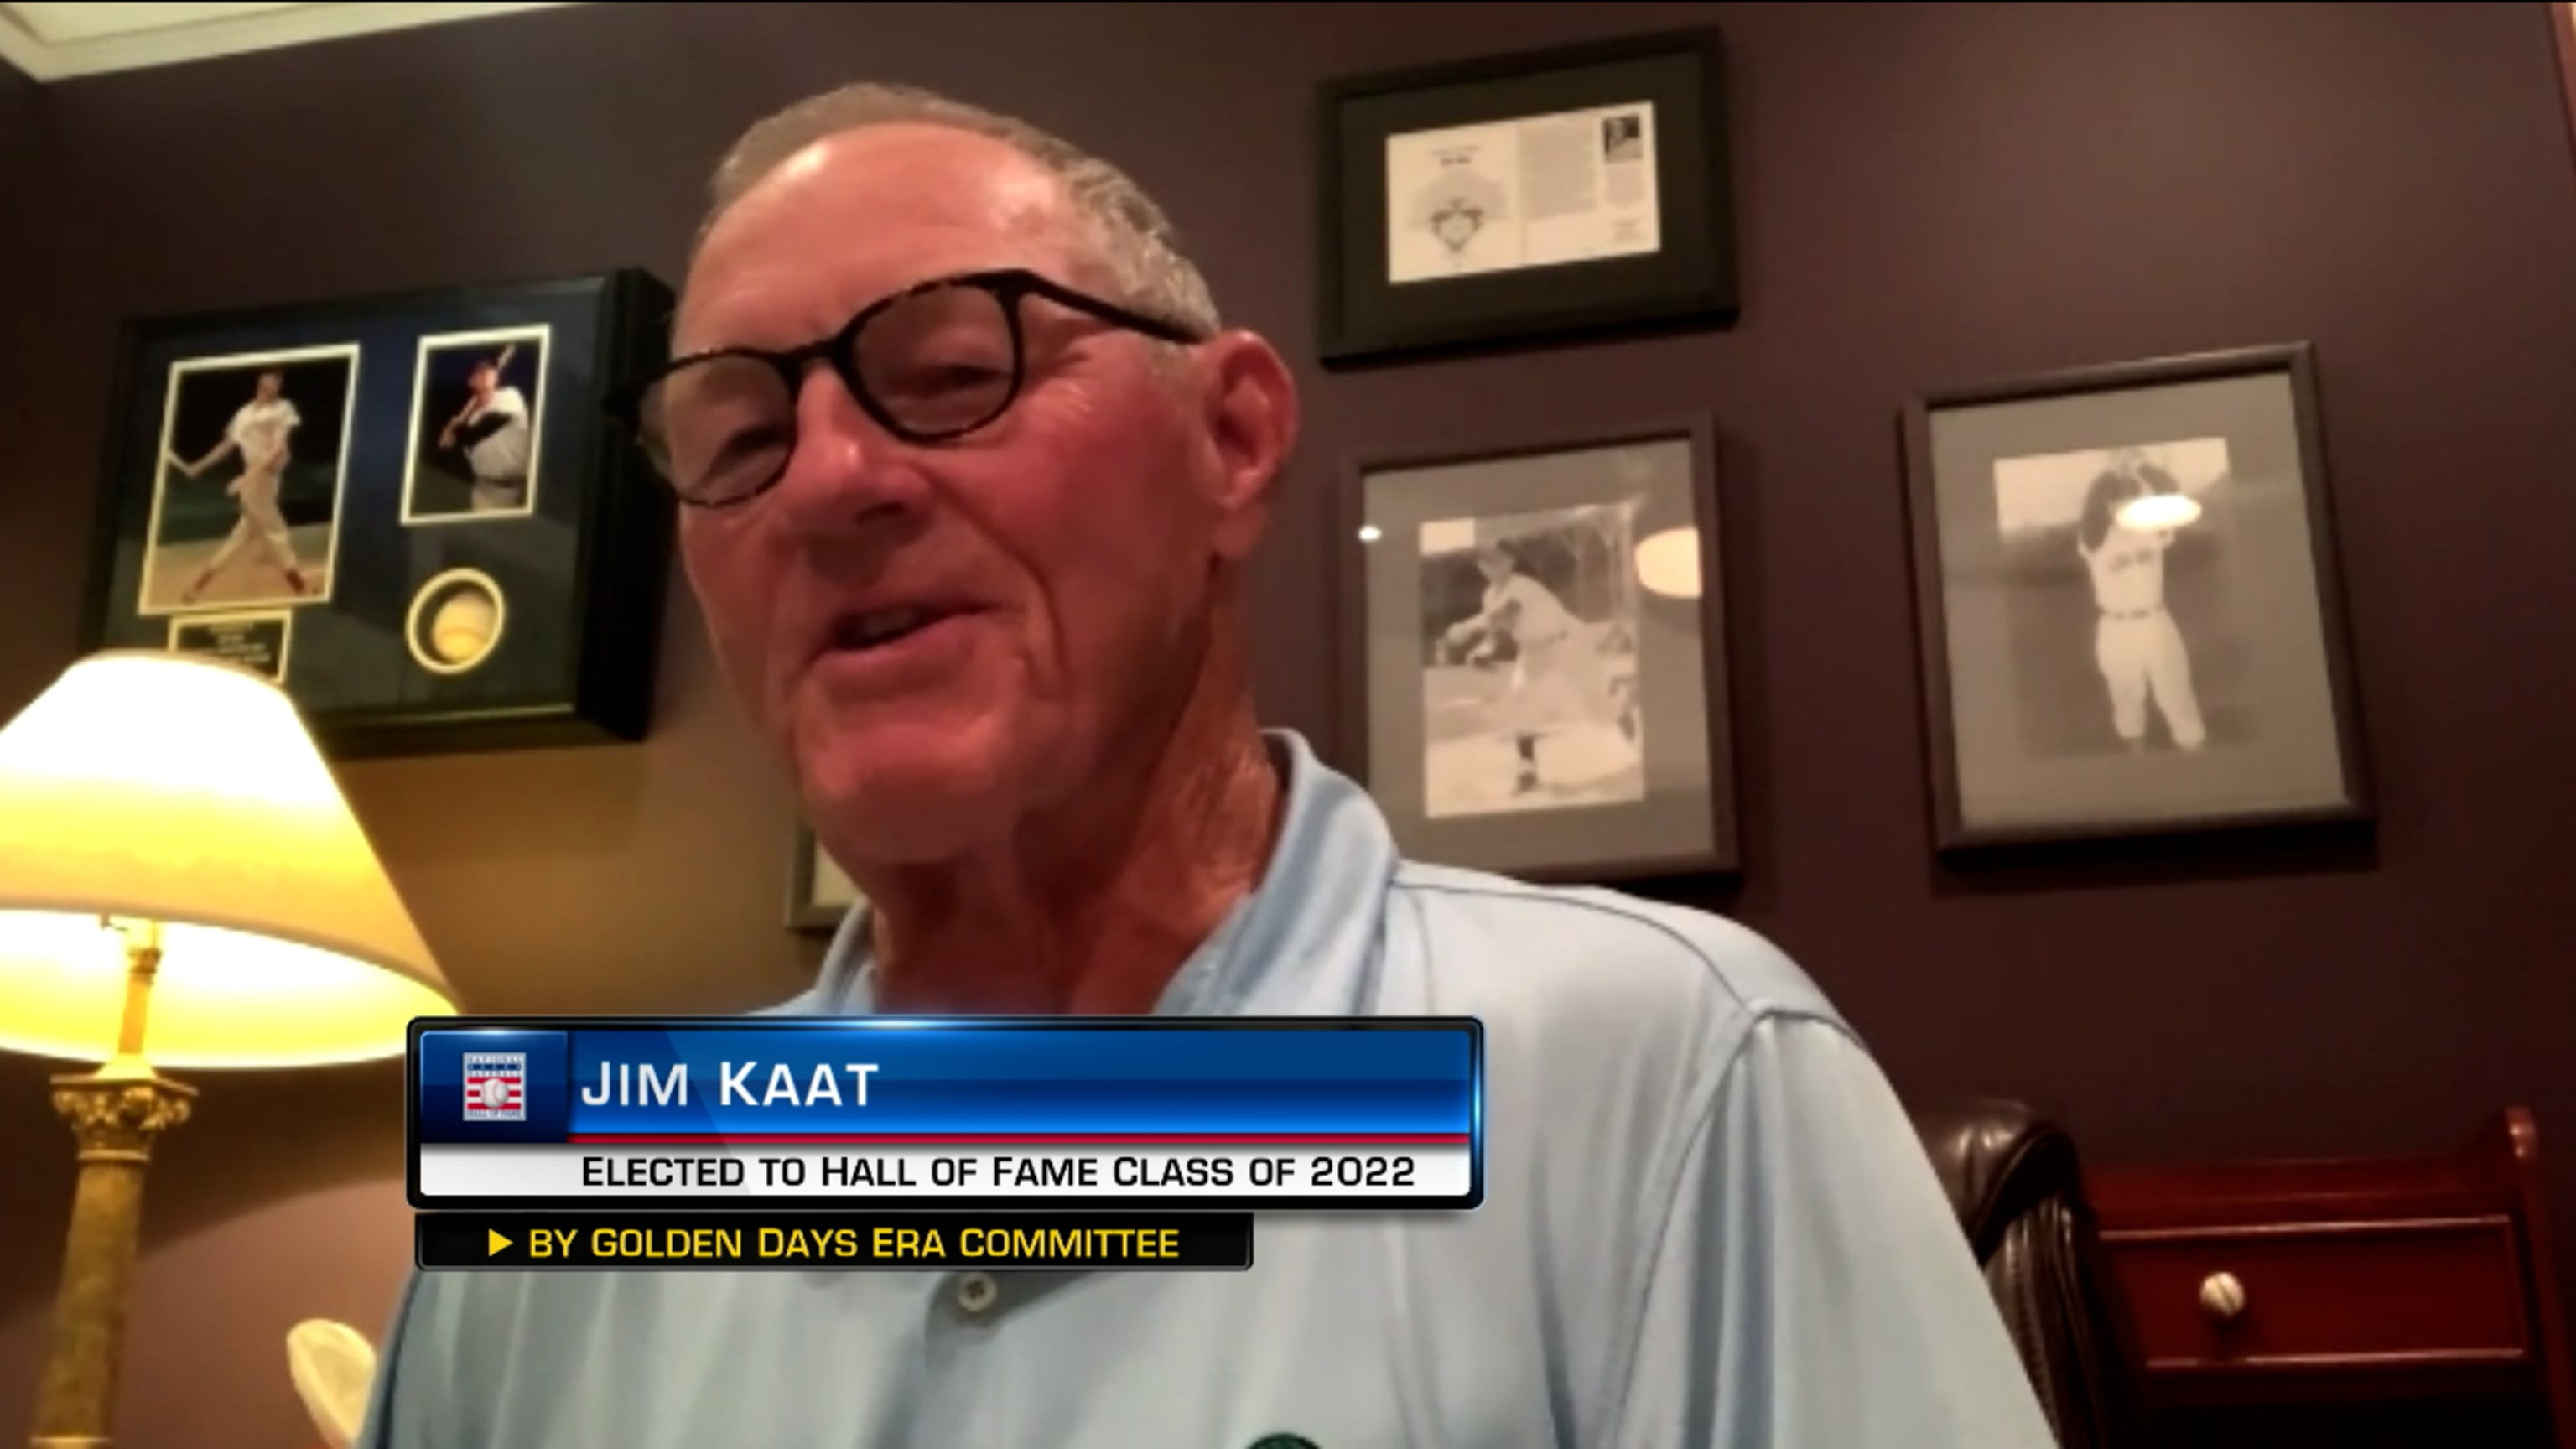 Happy Jim Kaat Number Retirement Day! Stop by the @twins clubhouse